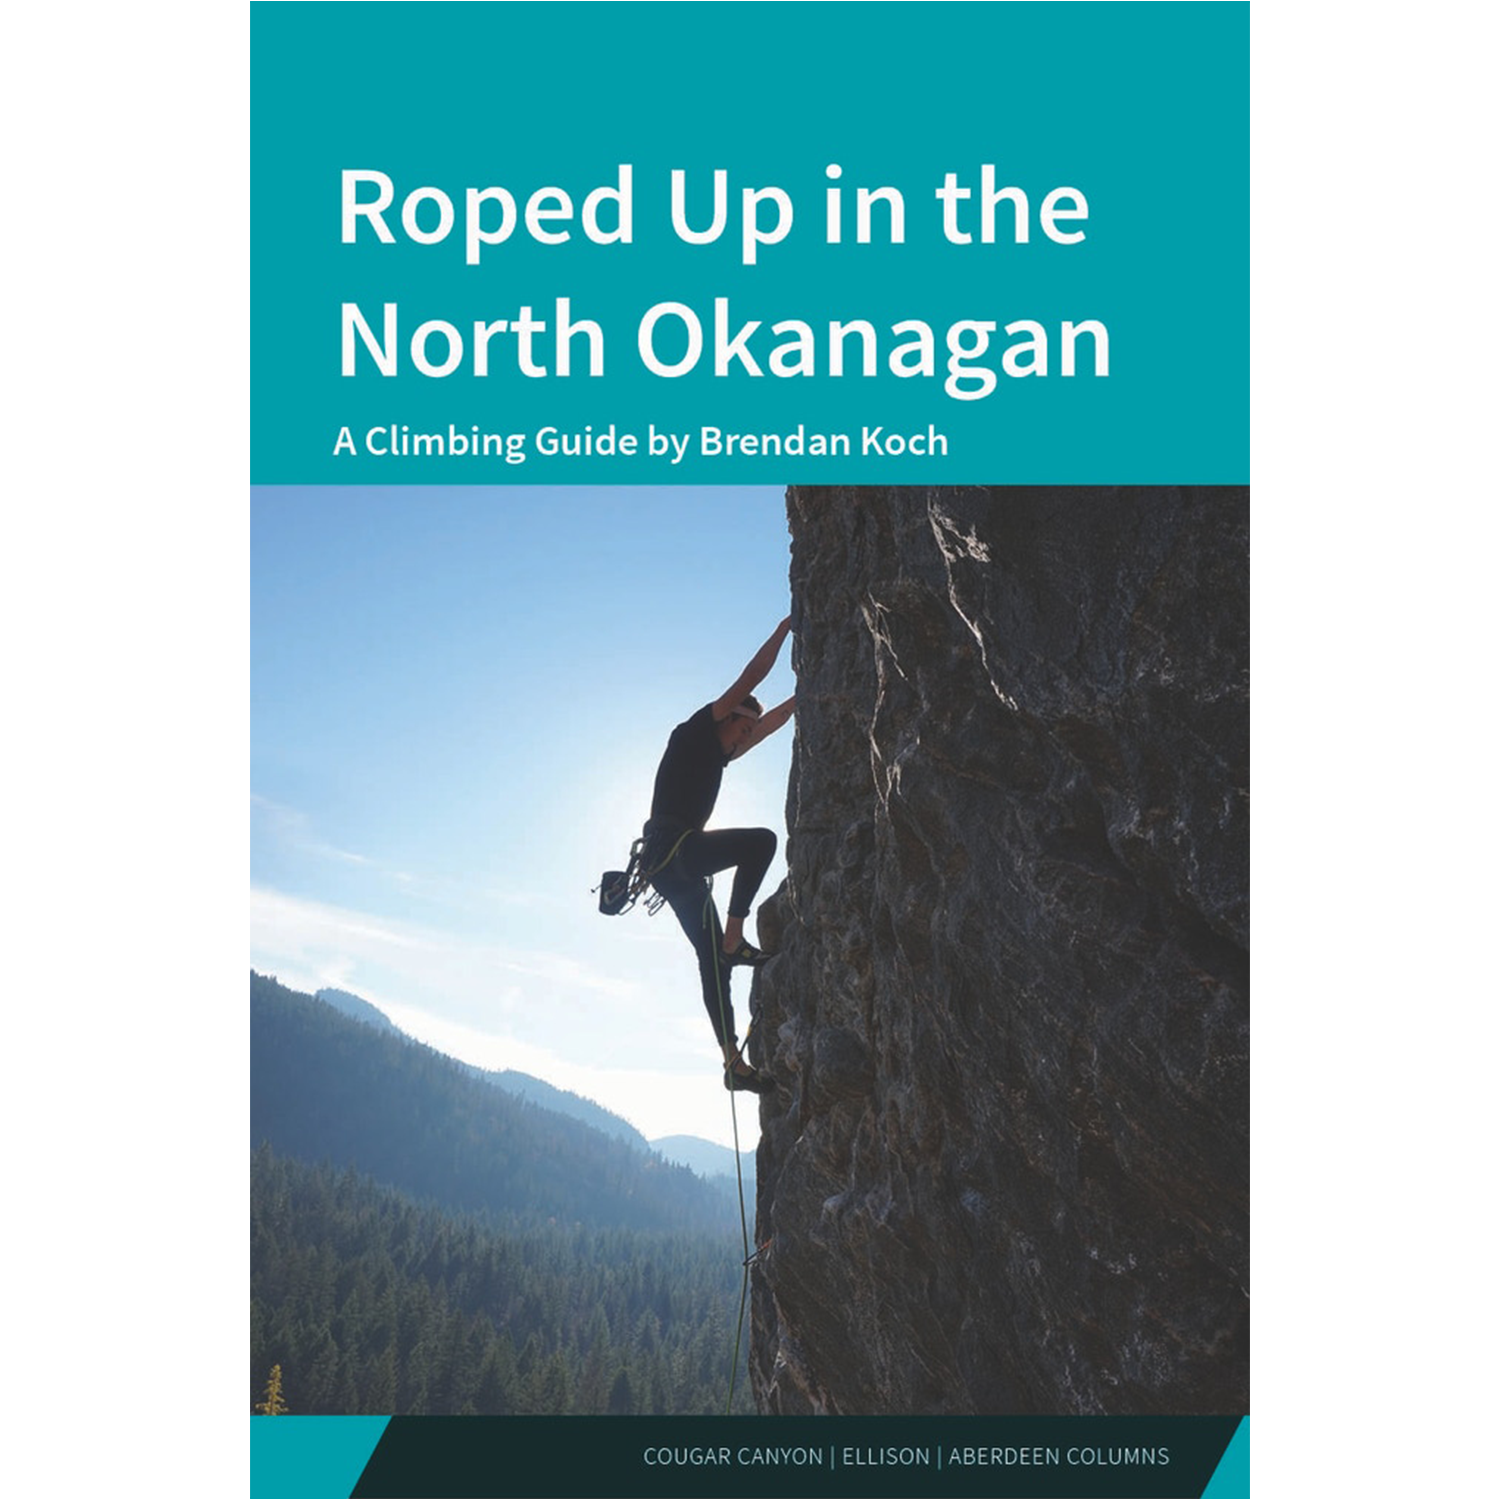 Roped Up in the North Okanagan